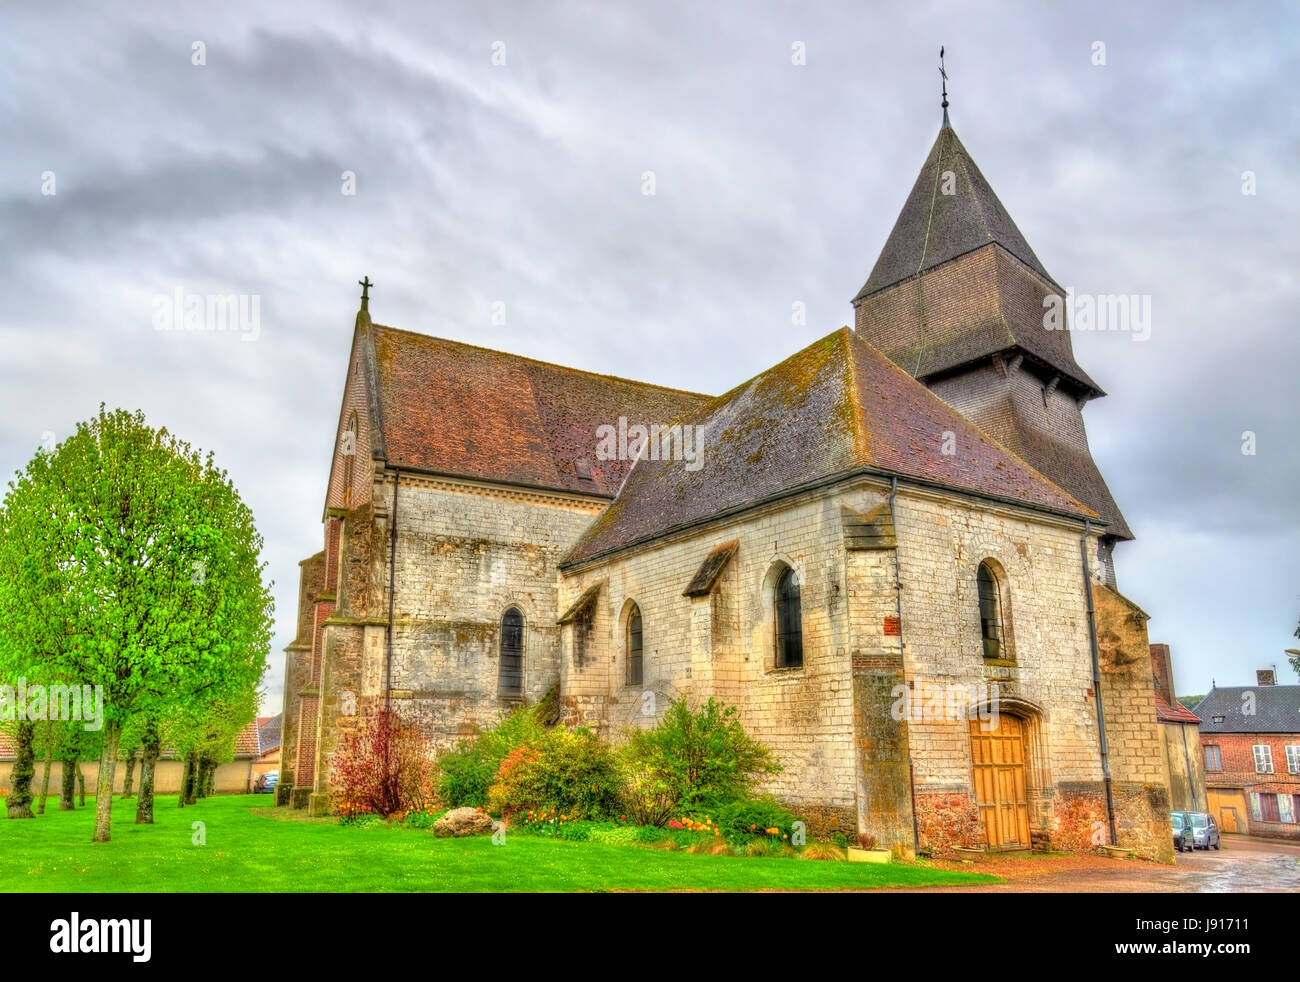 Collegiate church of the Assumption of Mary in Villemaur-sur-Vanne - France Stock Photo